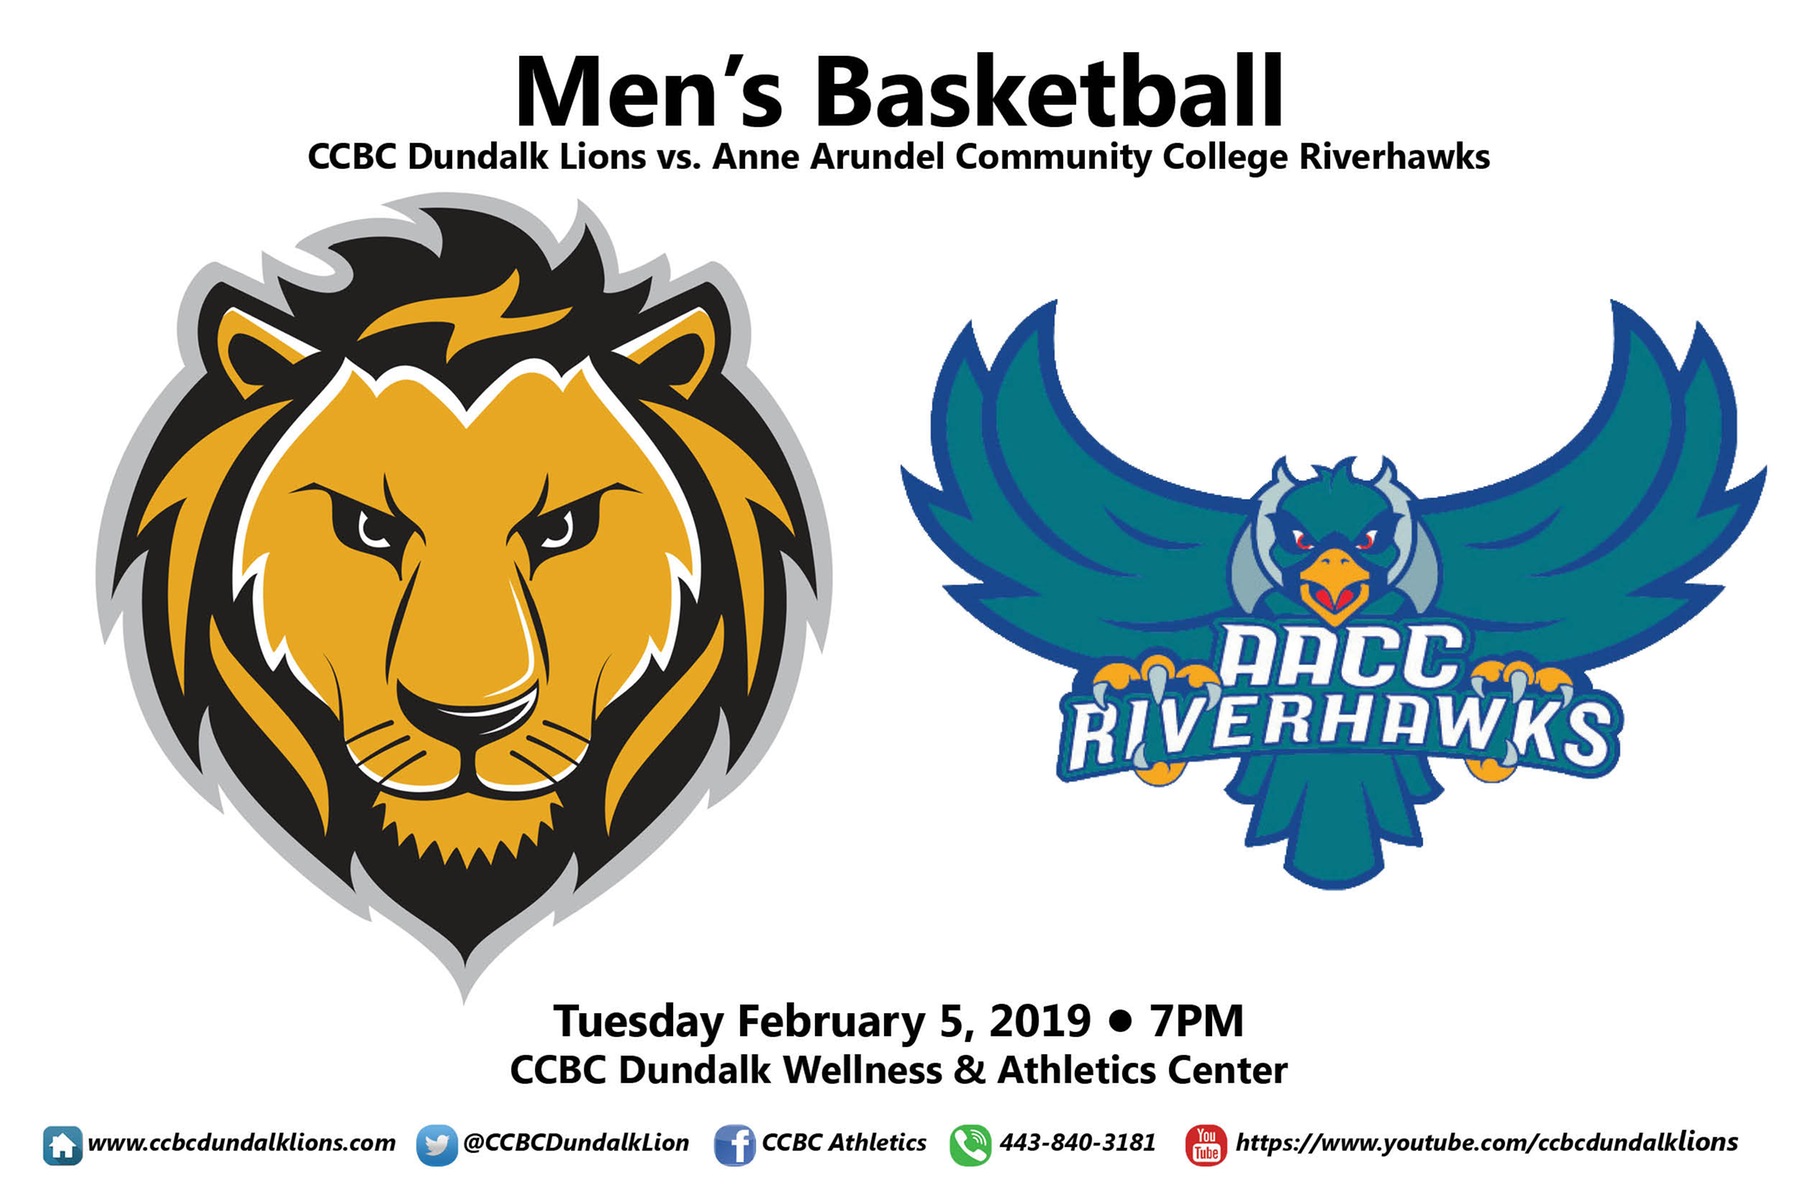 Lions vs. Riverhawks | Watch live at 7PM